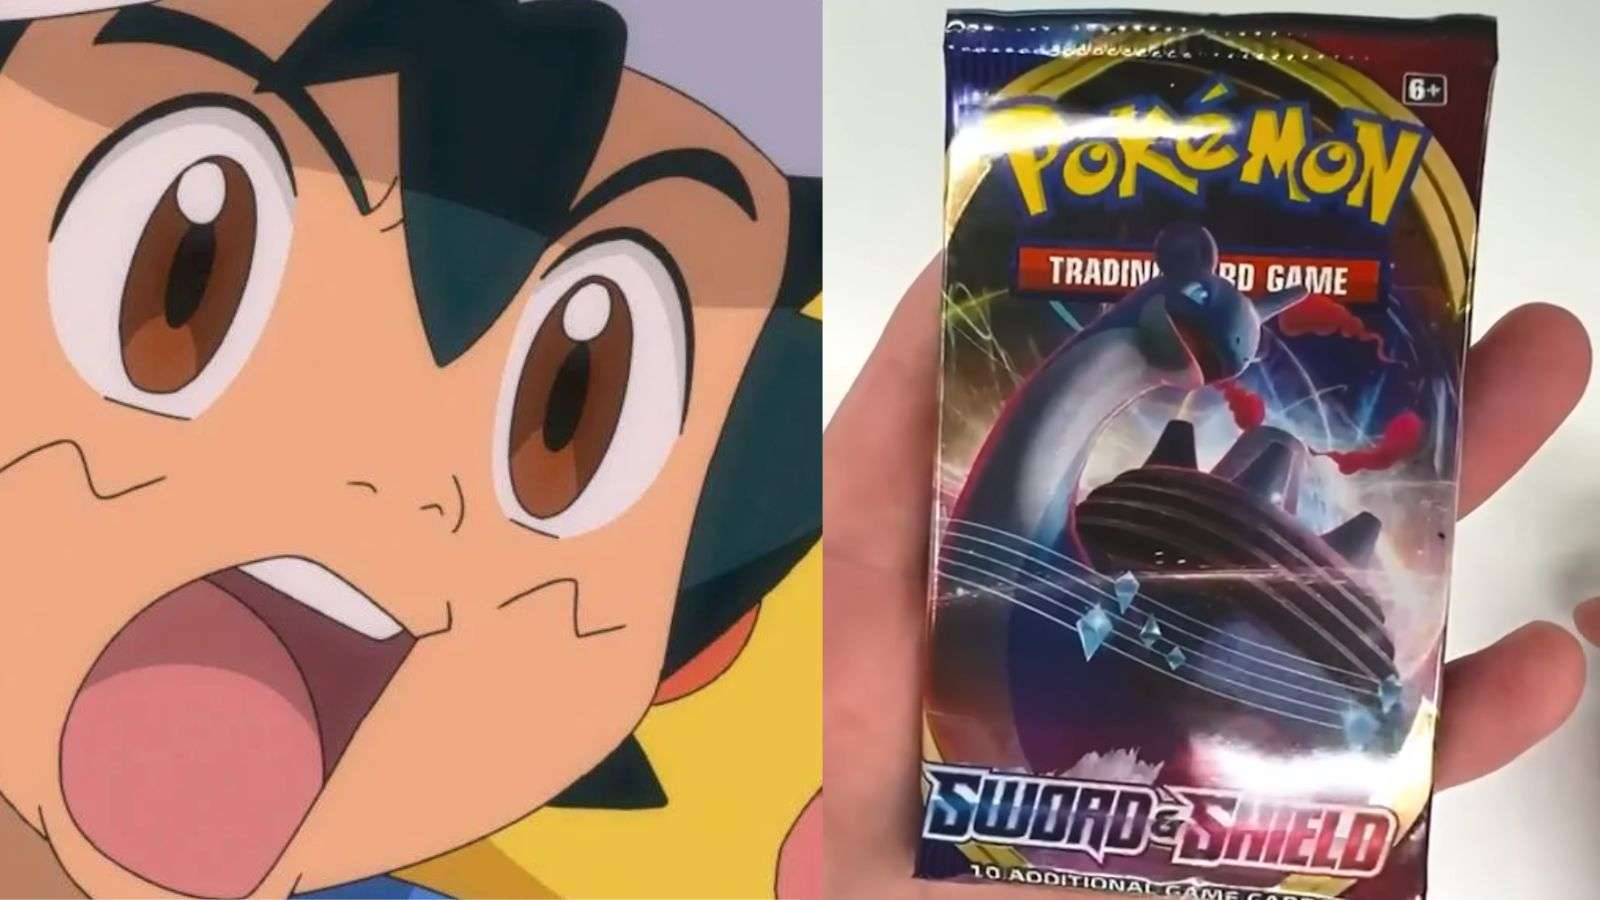 I Lost It When I Realized It's The Rarest Pokemon Card 